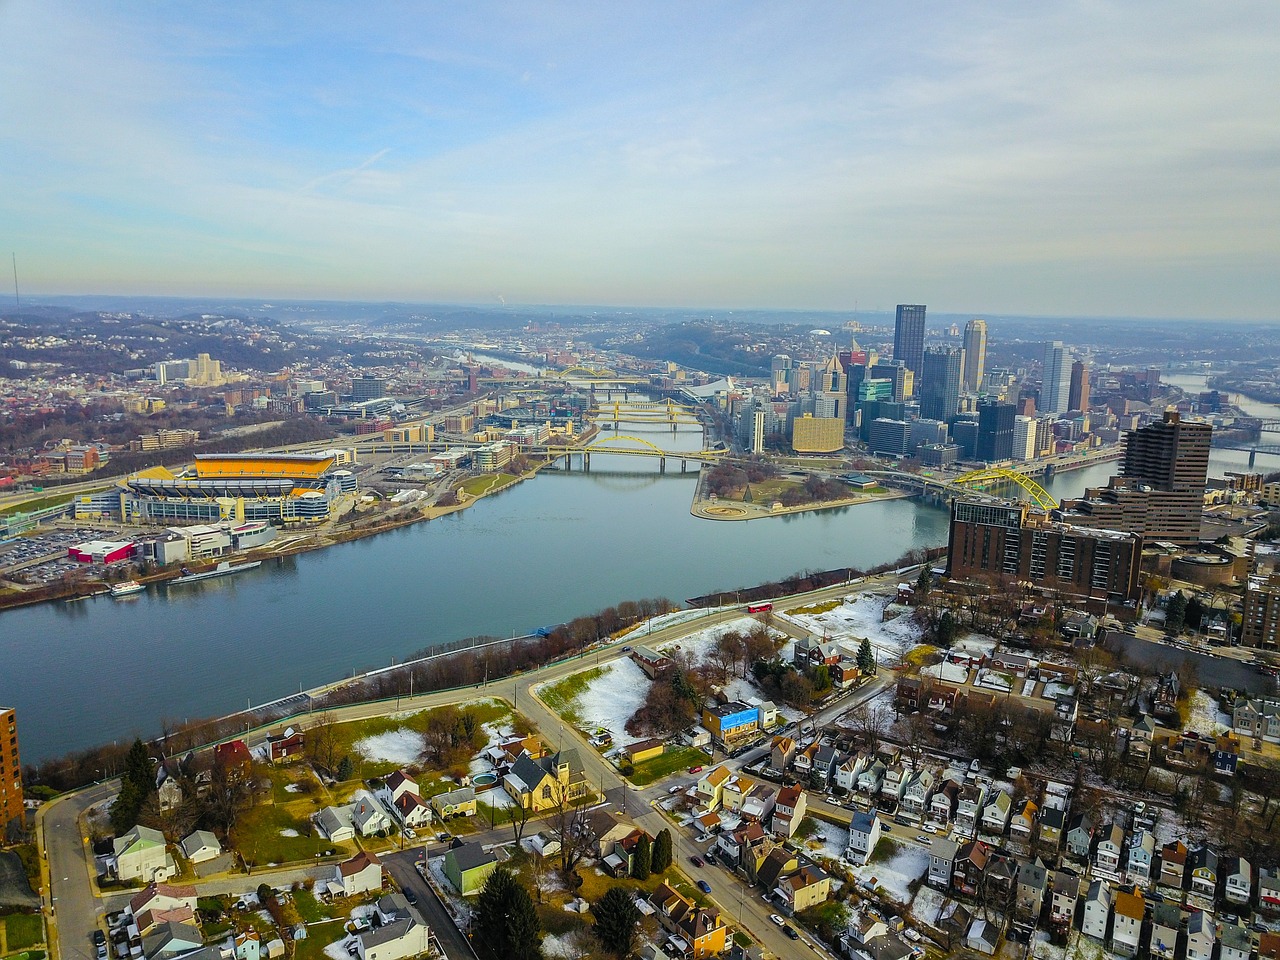 Aerial shot of Pittsburgh. Image by Christopher Klein from Pixabay.